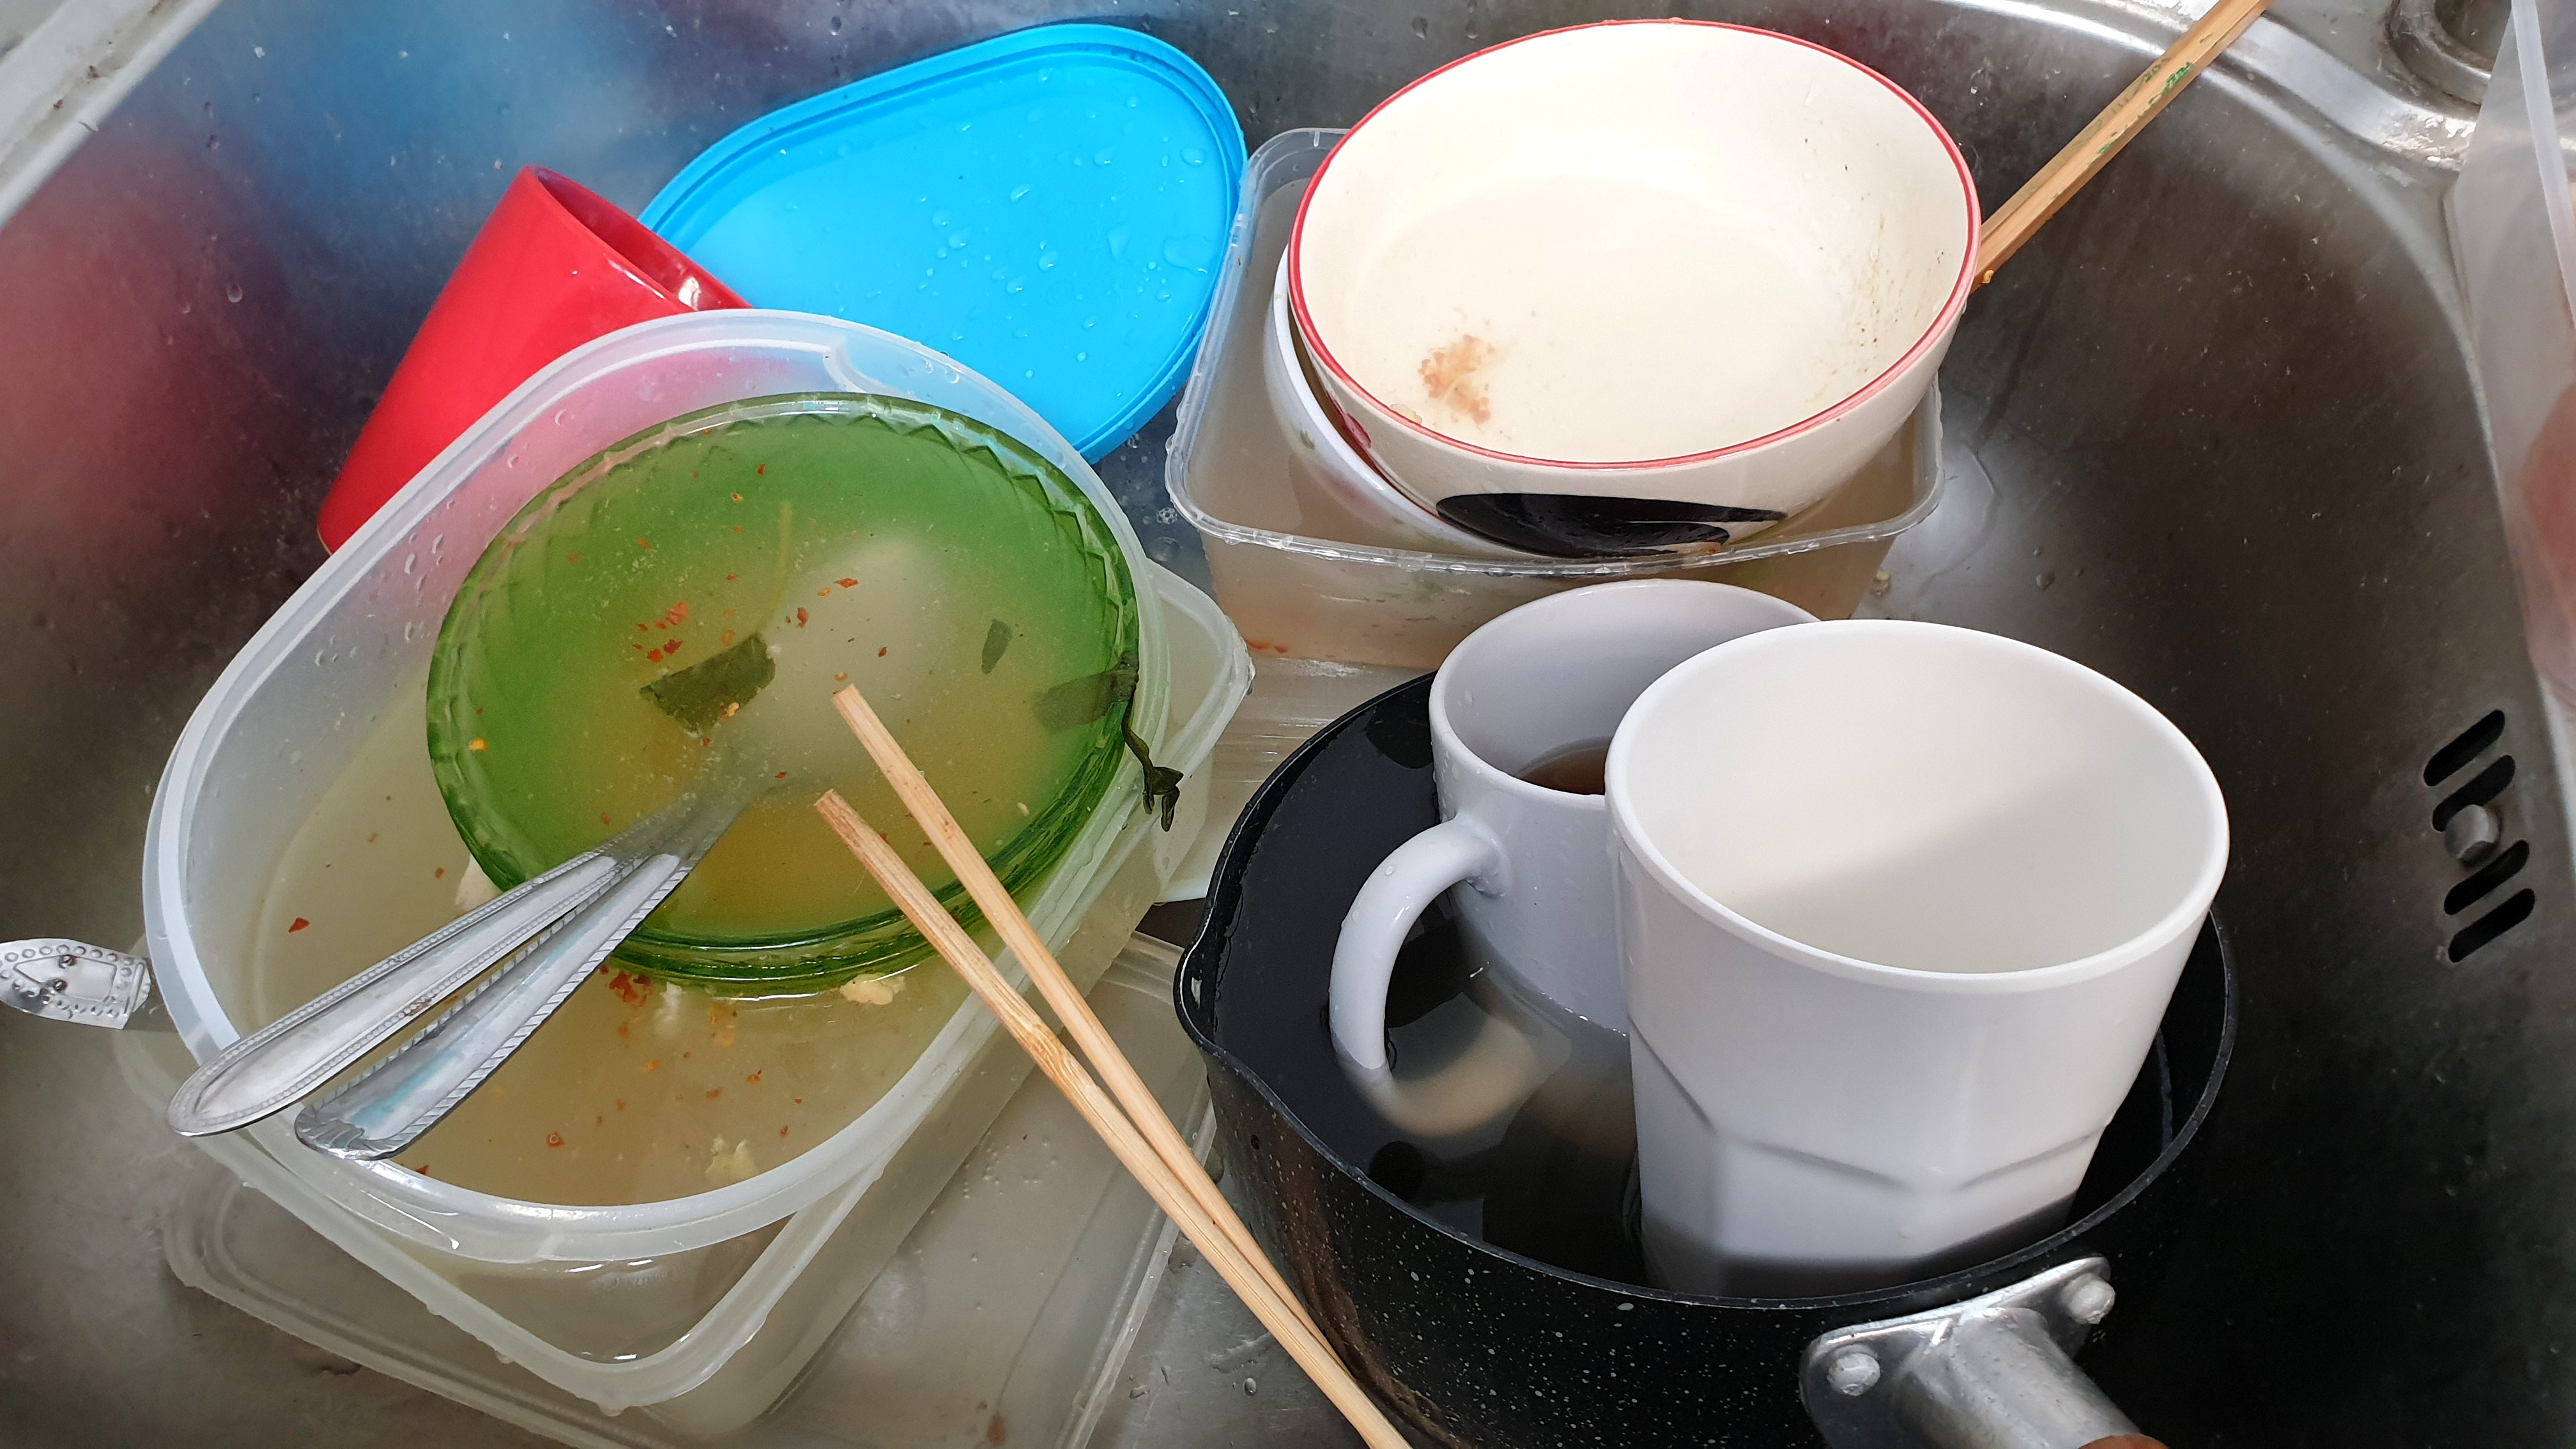 Dirty dishes and chopsticks in a kitchen sink | Source: Shutterstock